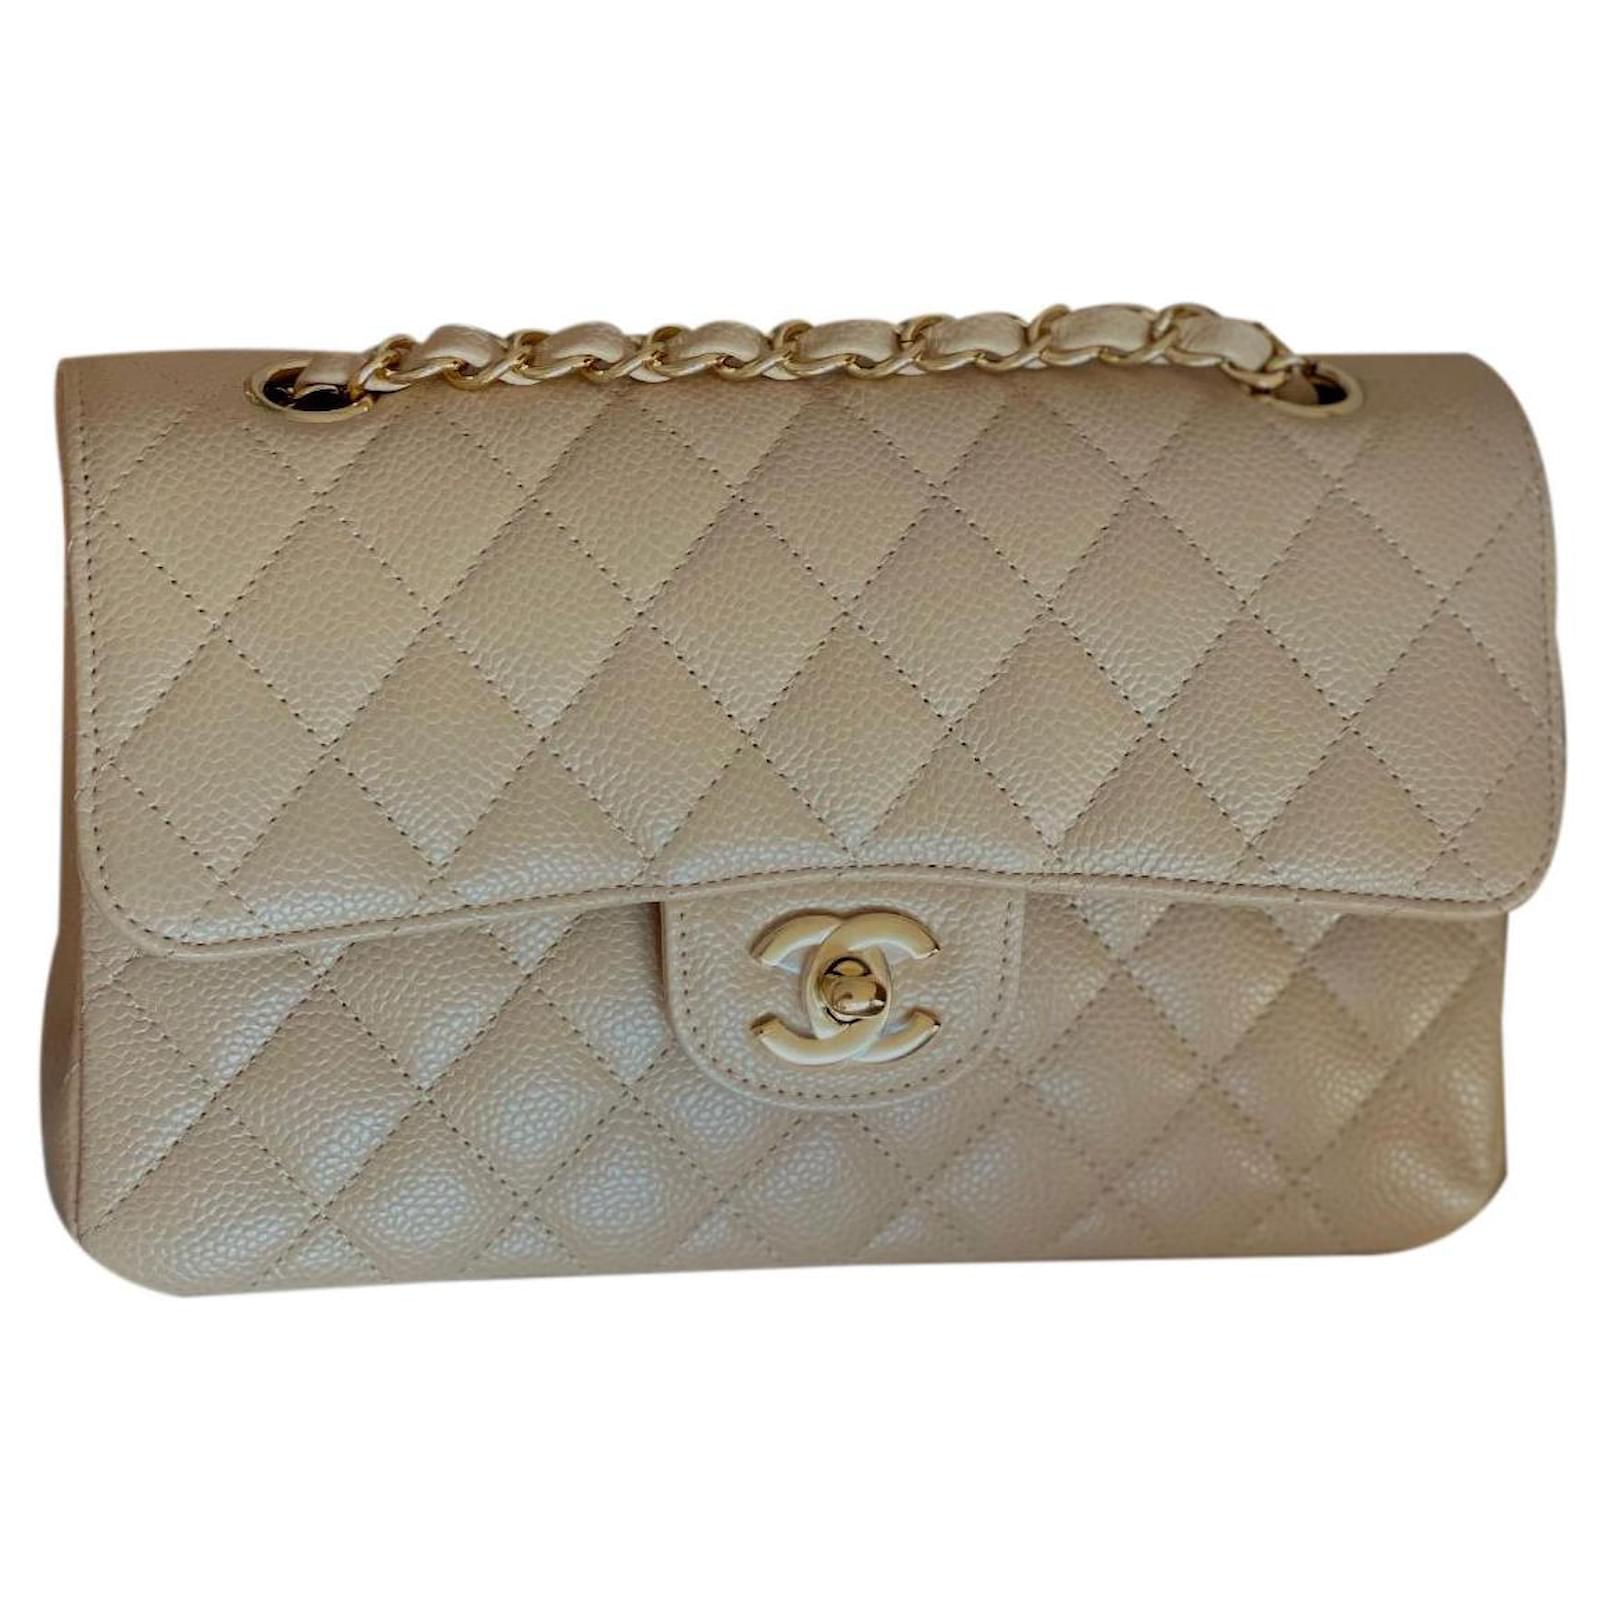 Chanel classic lined flap caviar beige